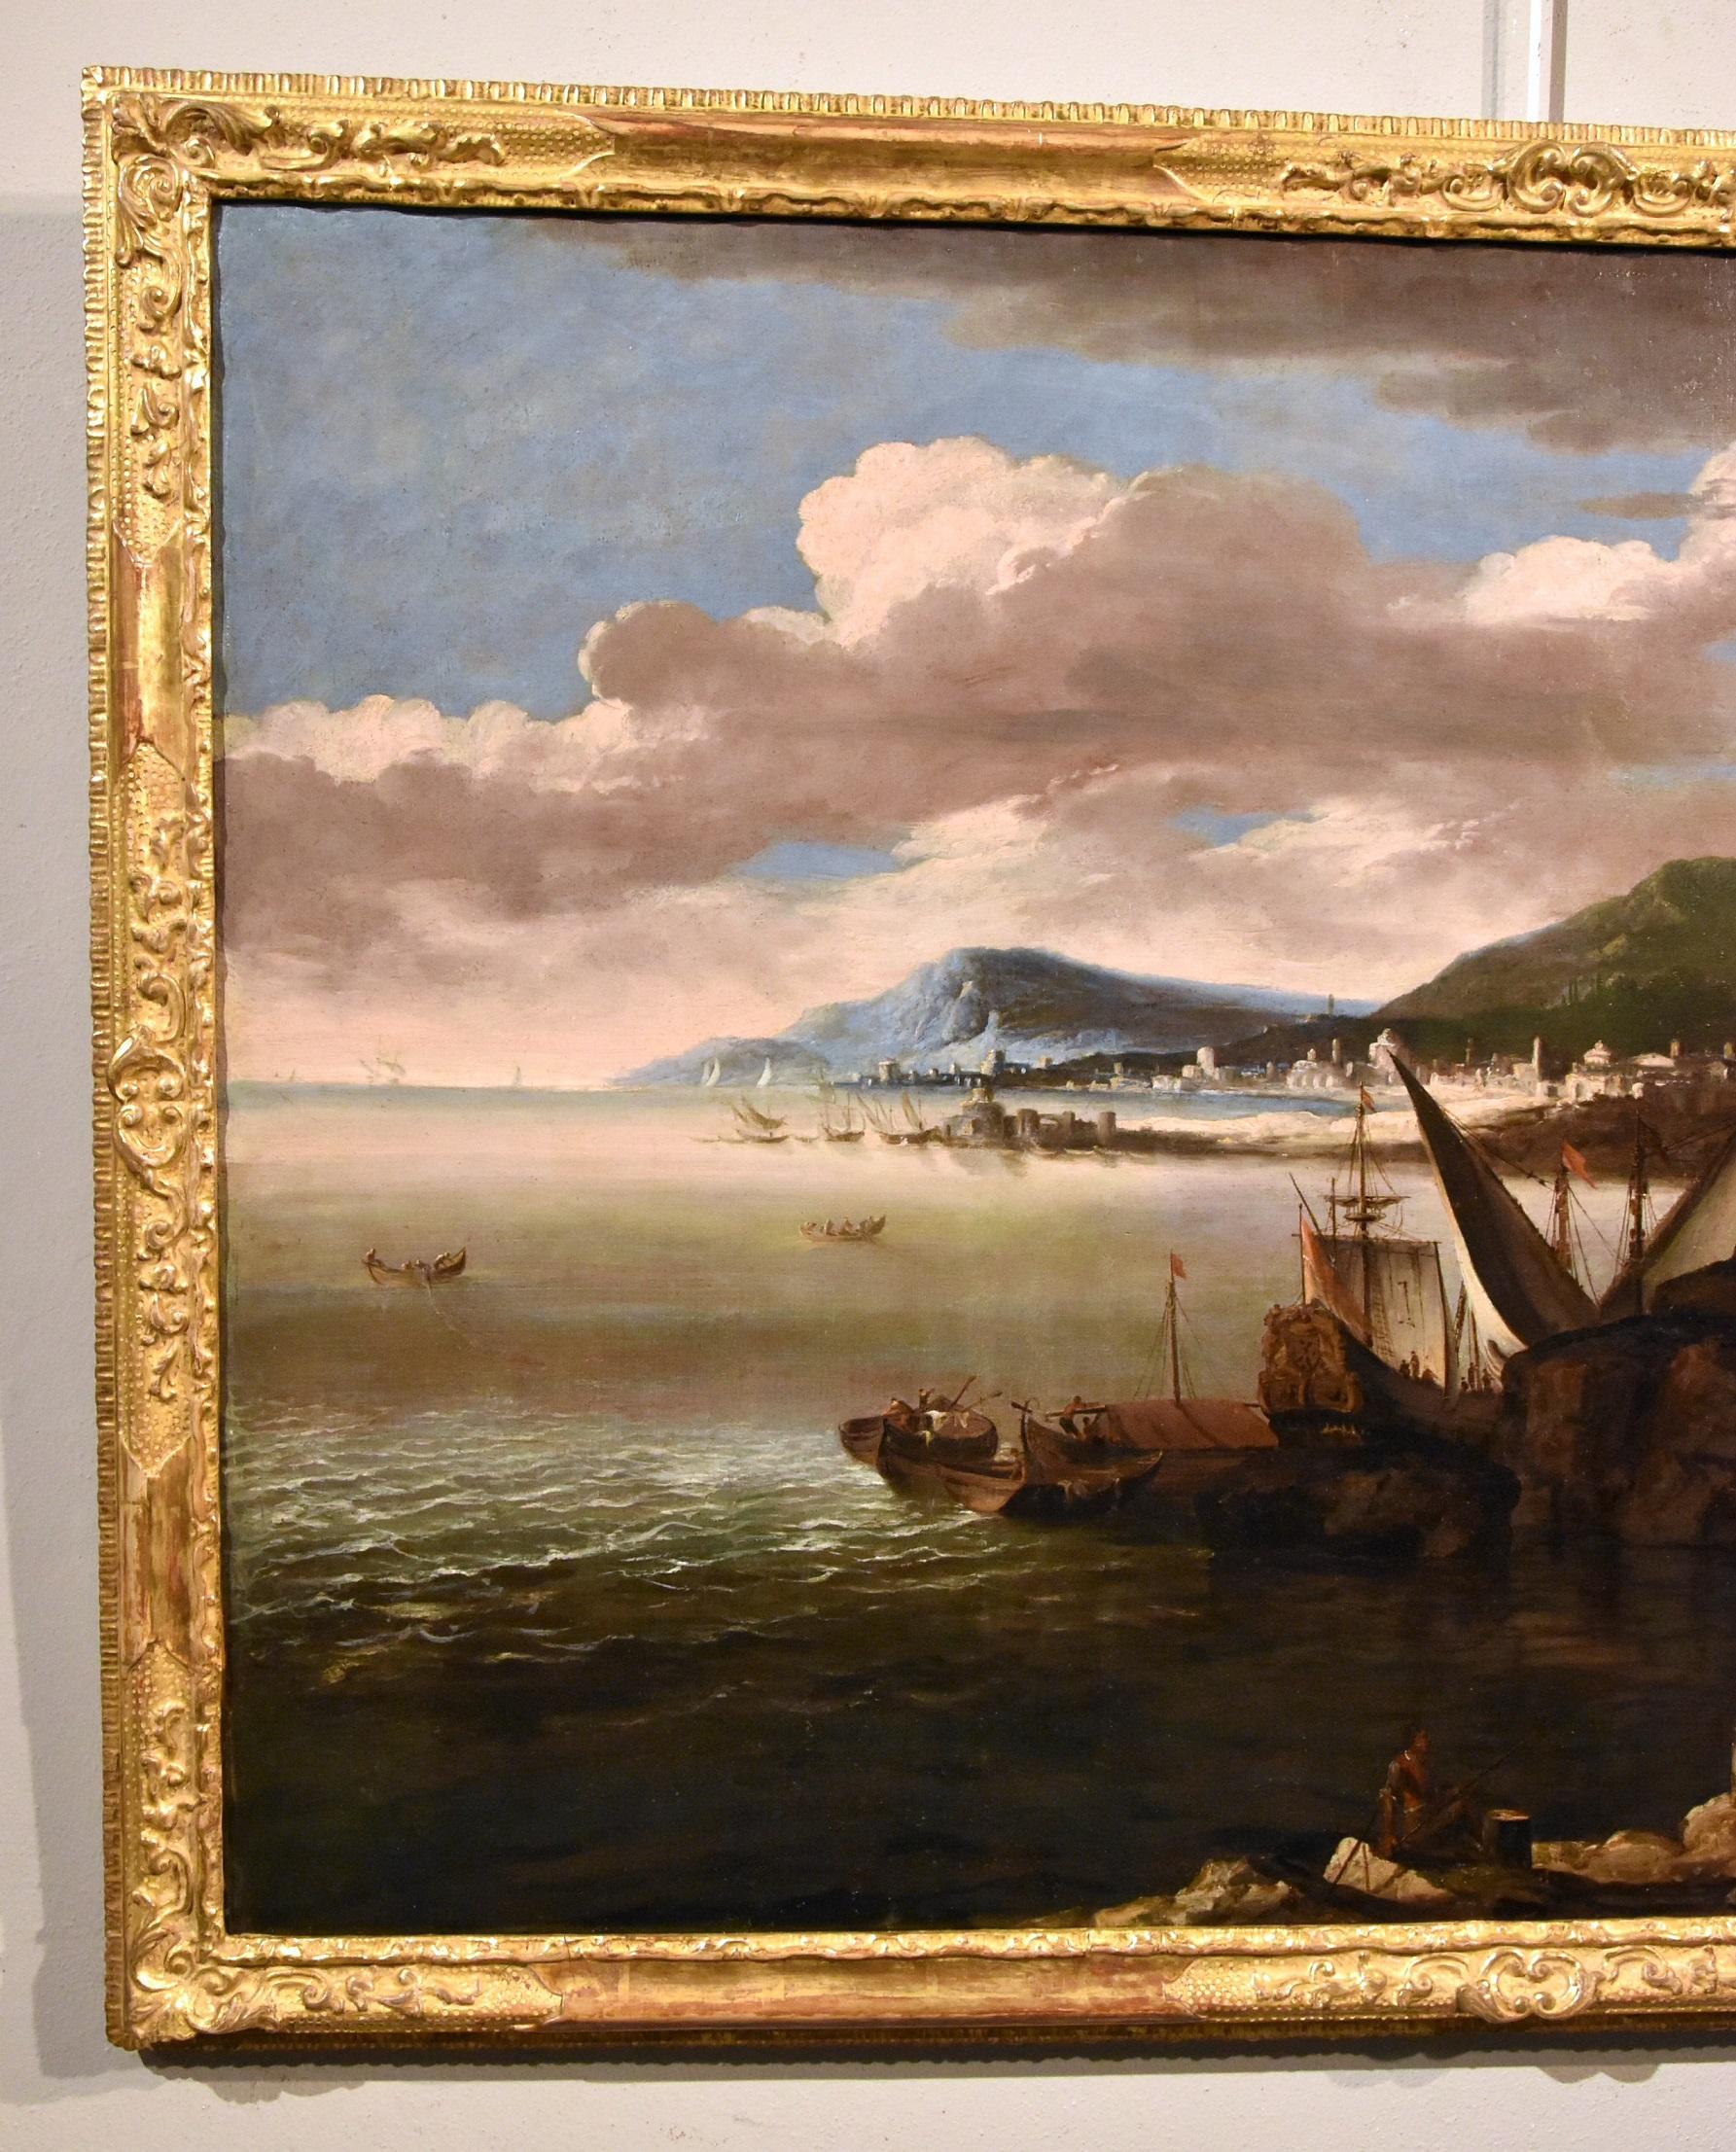 Ricci View Coastal Landscape Paint Oil on canvas Old master 17/18th Century Art For Sale 1